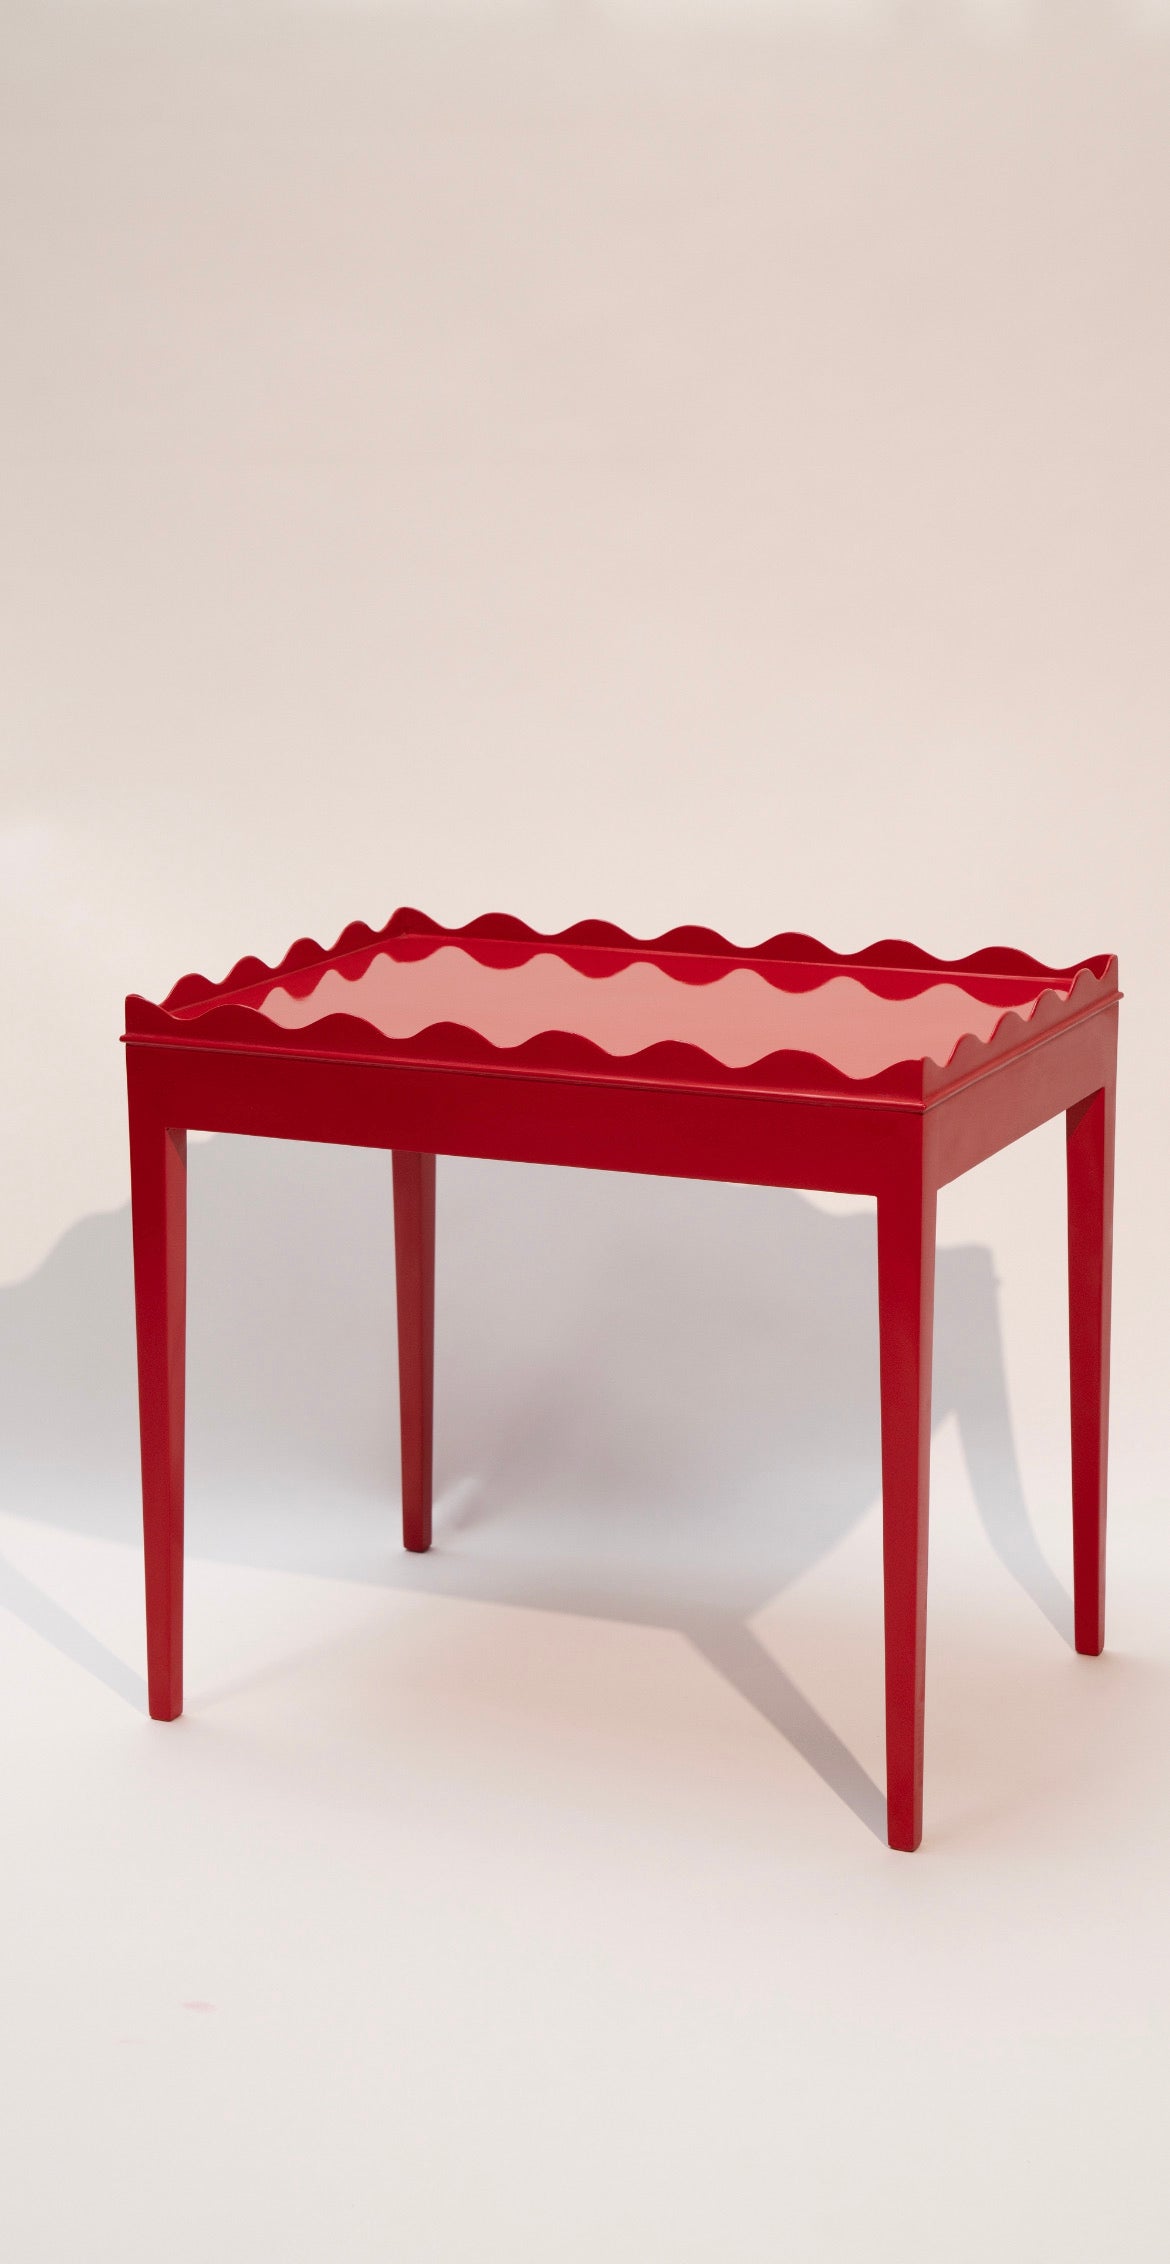 Vintage Hand-Lacquered Ruby Red Side Table